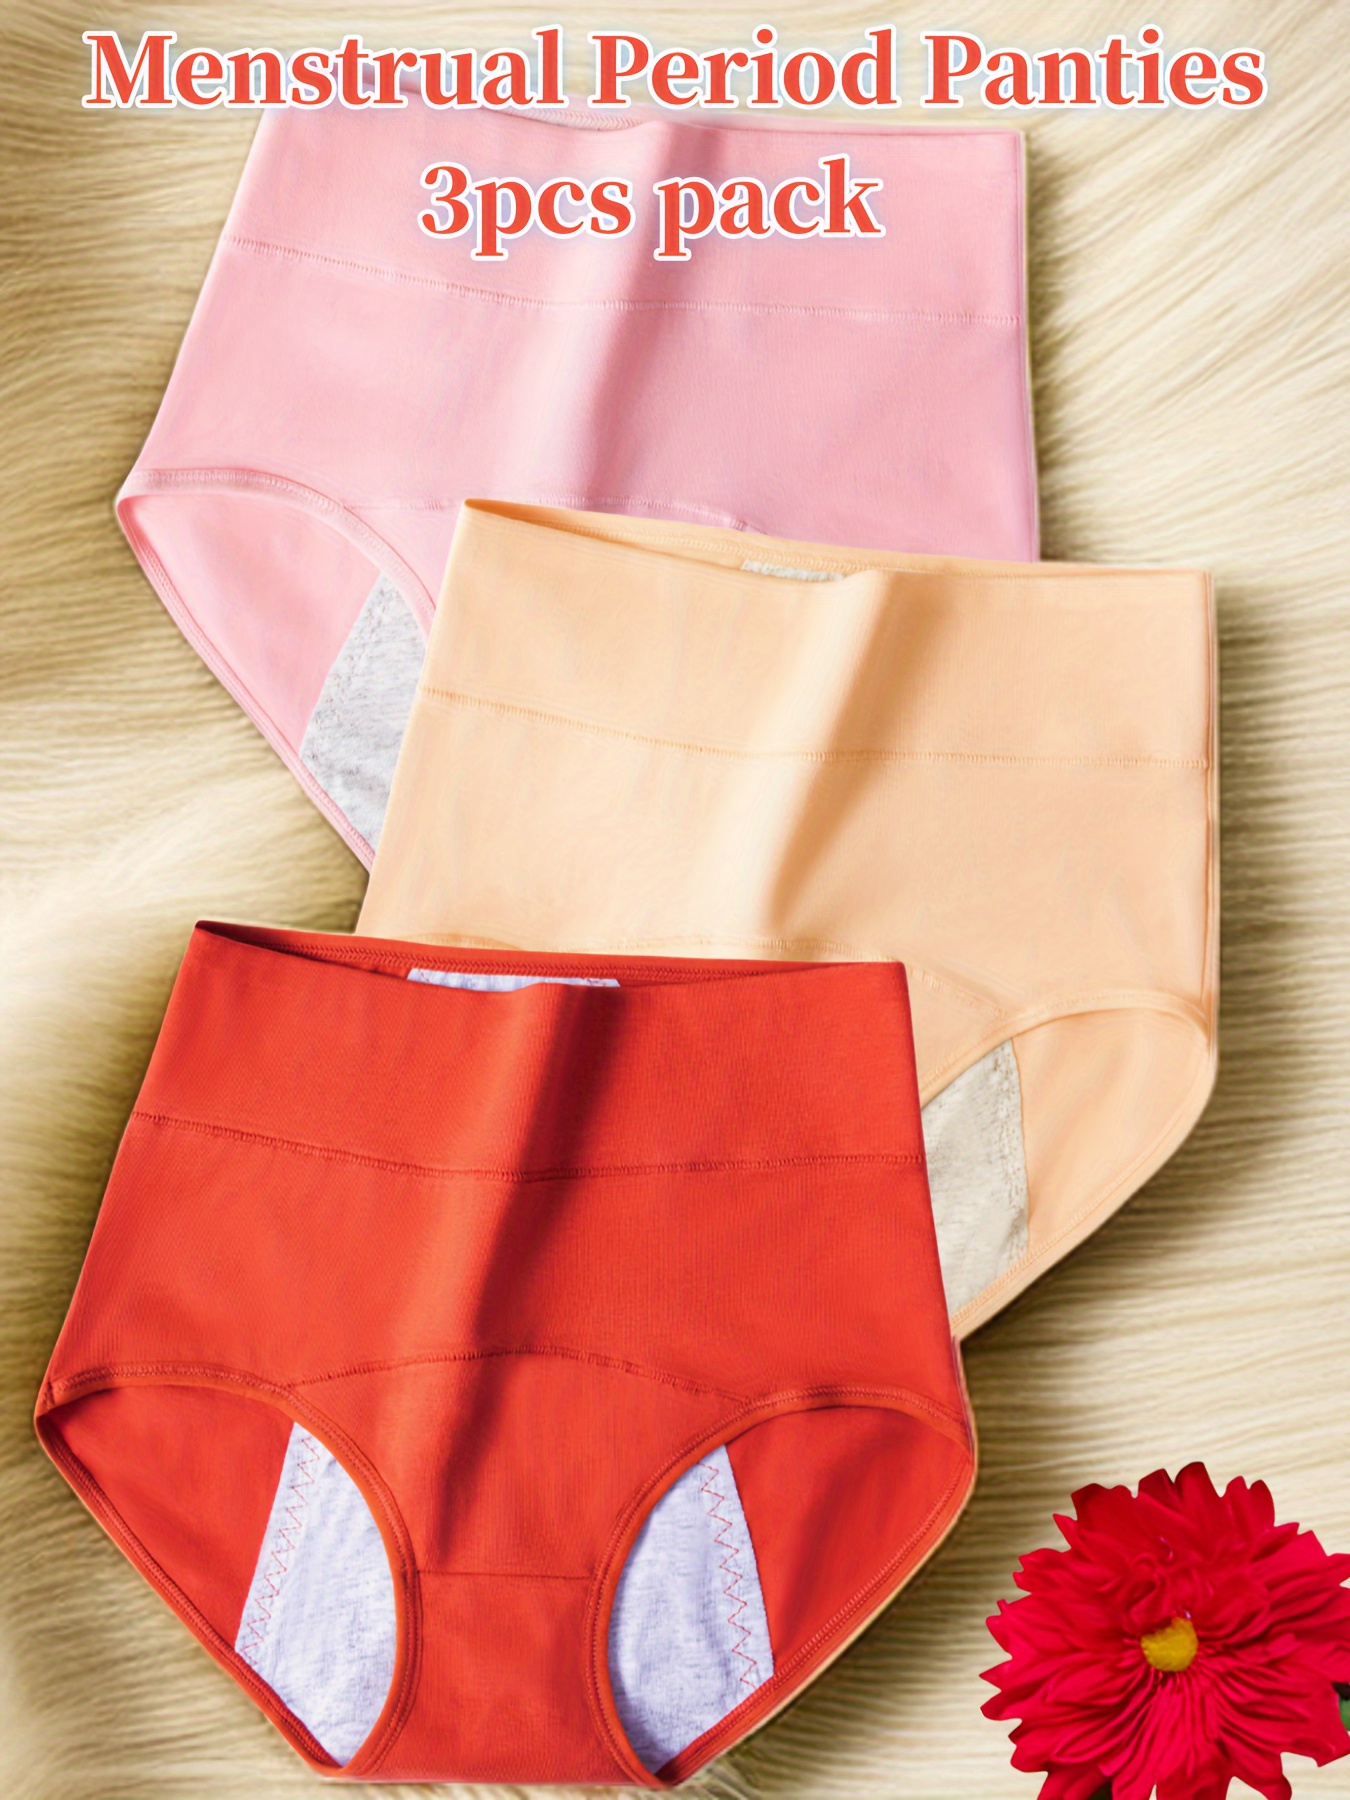 Incontinence Underwear, Breathable Incontinence Underpants Made of Cotton,  Leak-Proof Pants for Urinary Incontinence with Changing Pad, Unisex